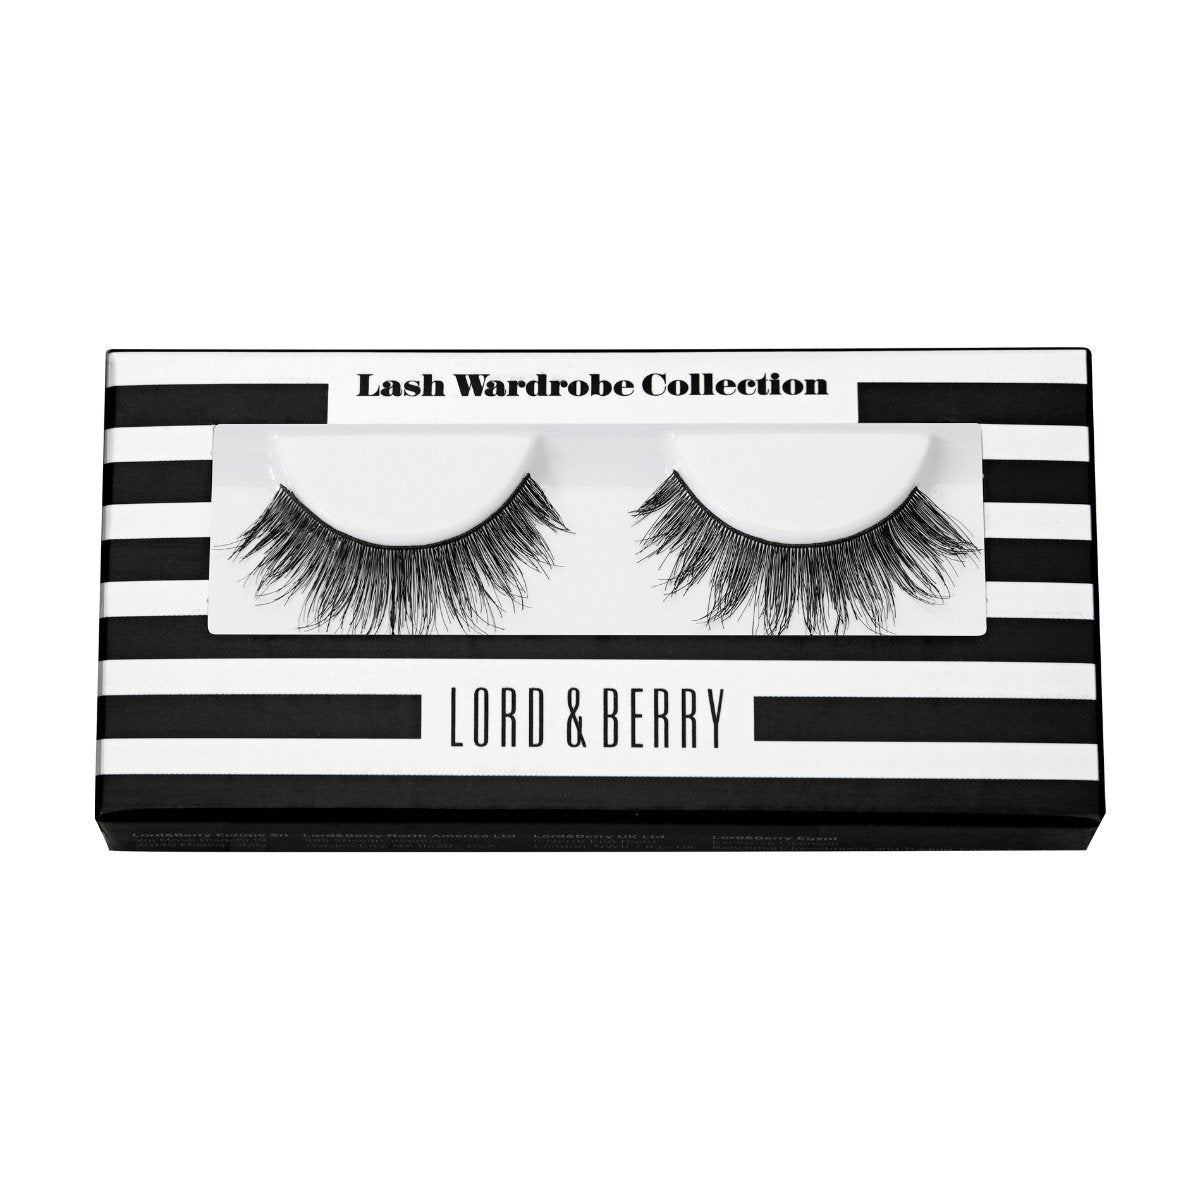 Lord & Berry Eyelashes Wardrobe Collection - EL22 - Bloom Pharmacy